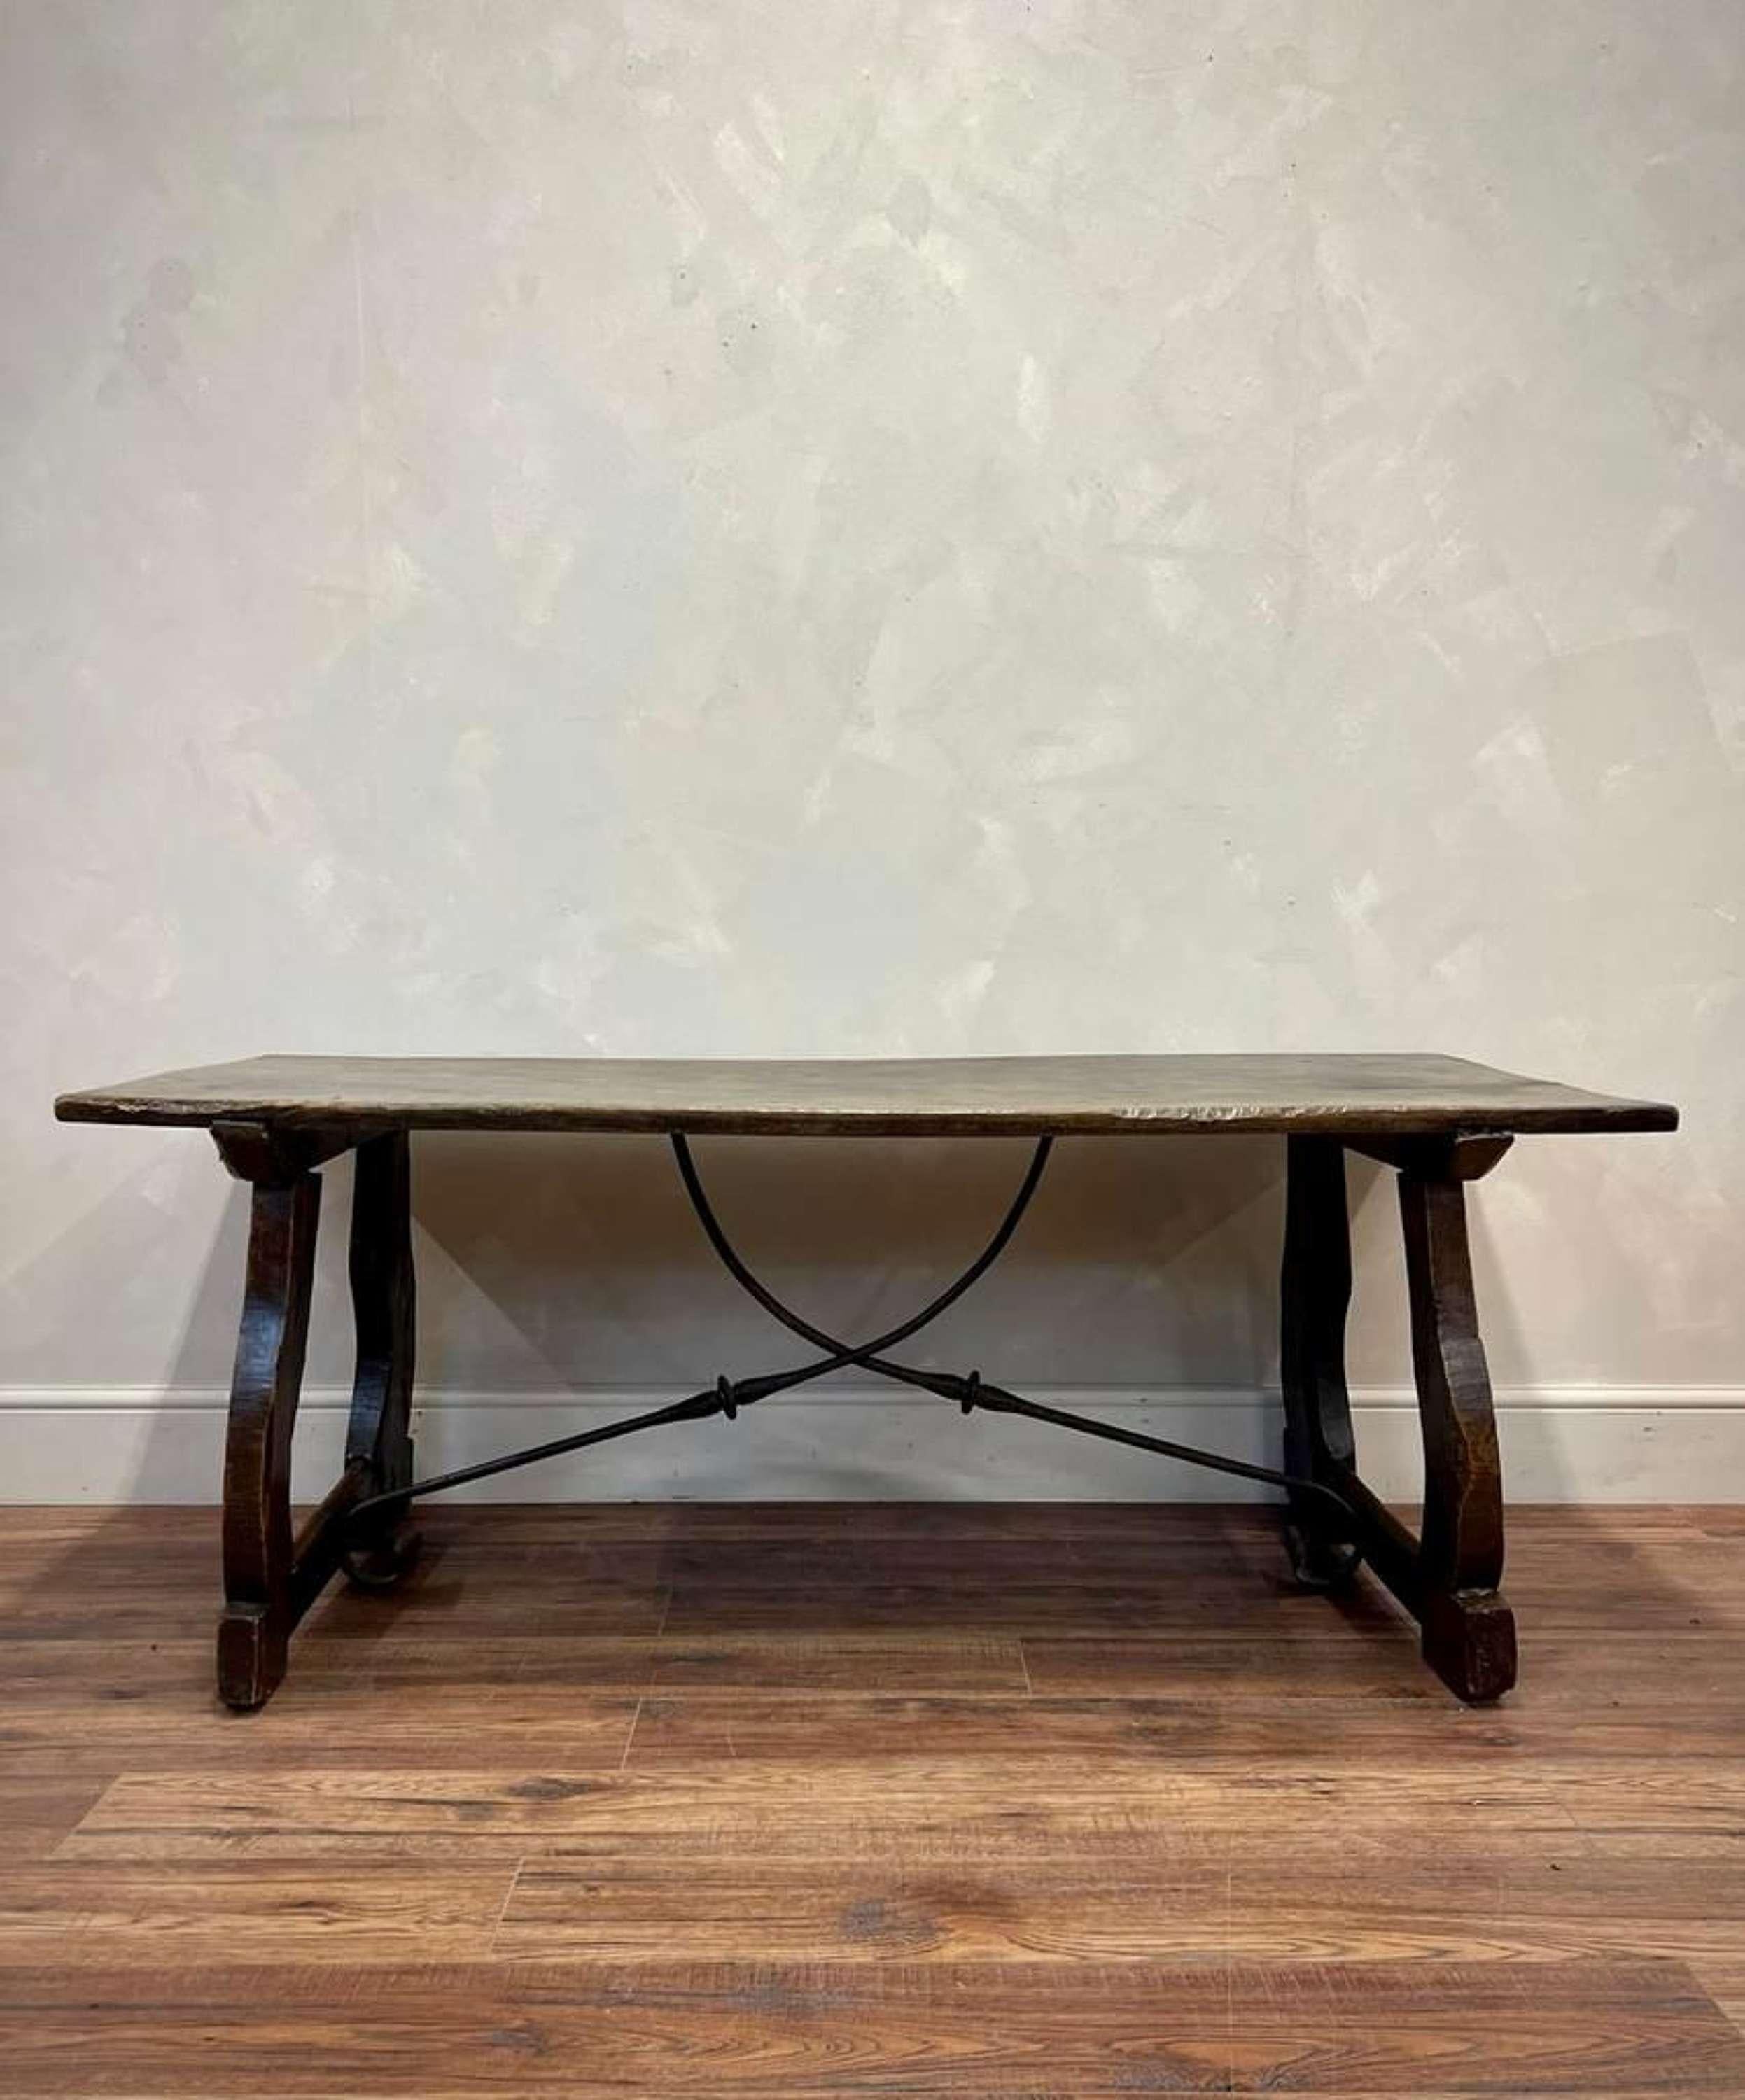 Beautiful hand carved Spanish walnut table with iron stretchers 
Carved lined detail to the legs 
General wear with age to the sides as shown 
This would work well as a console against the wall or behind a sofa 
This piece has been left as natural